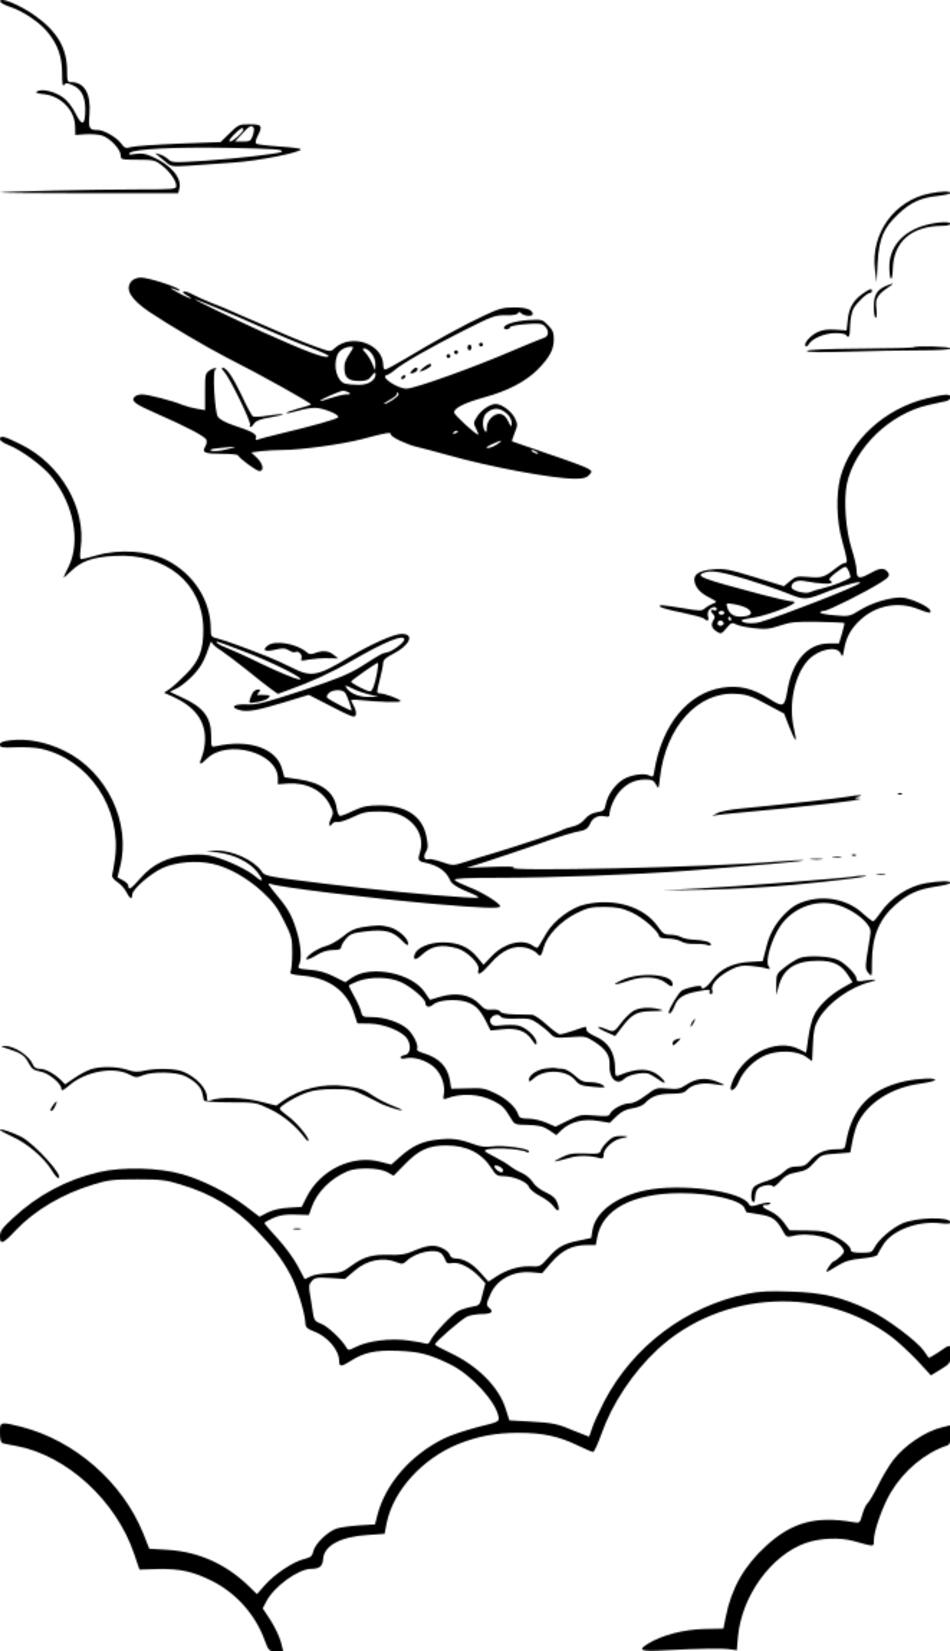 Coloring book Flying above the clouds on airplanes (Vertical)